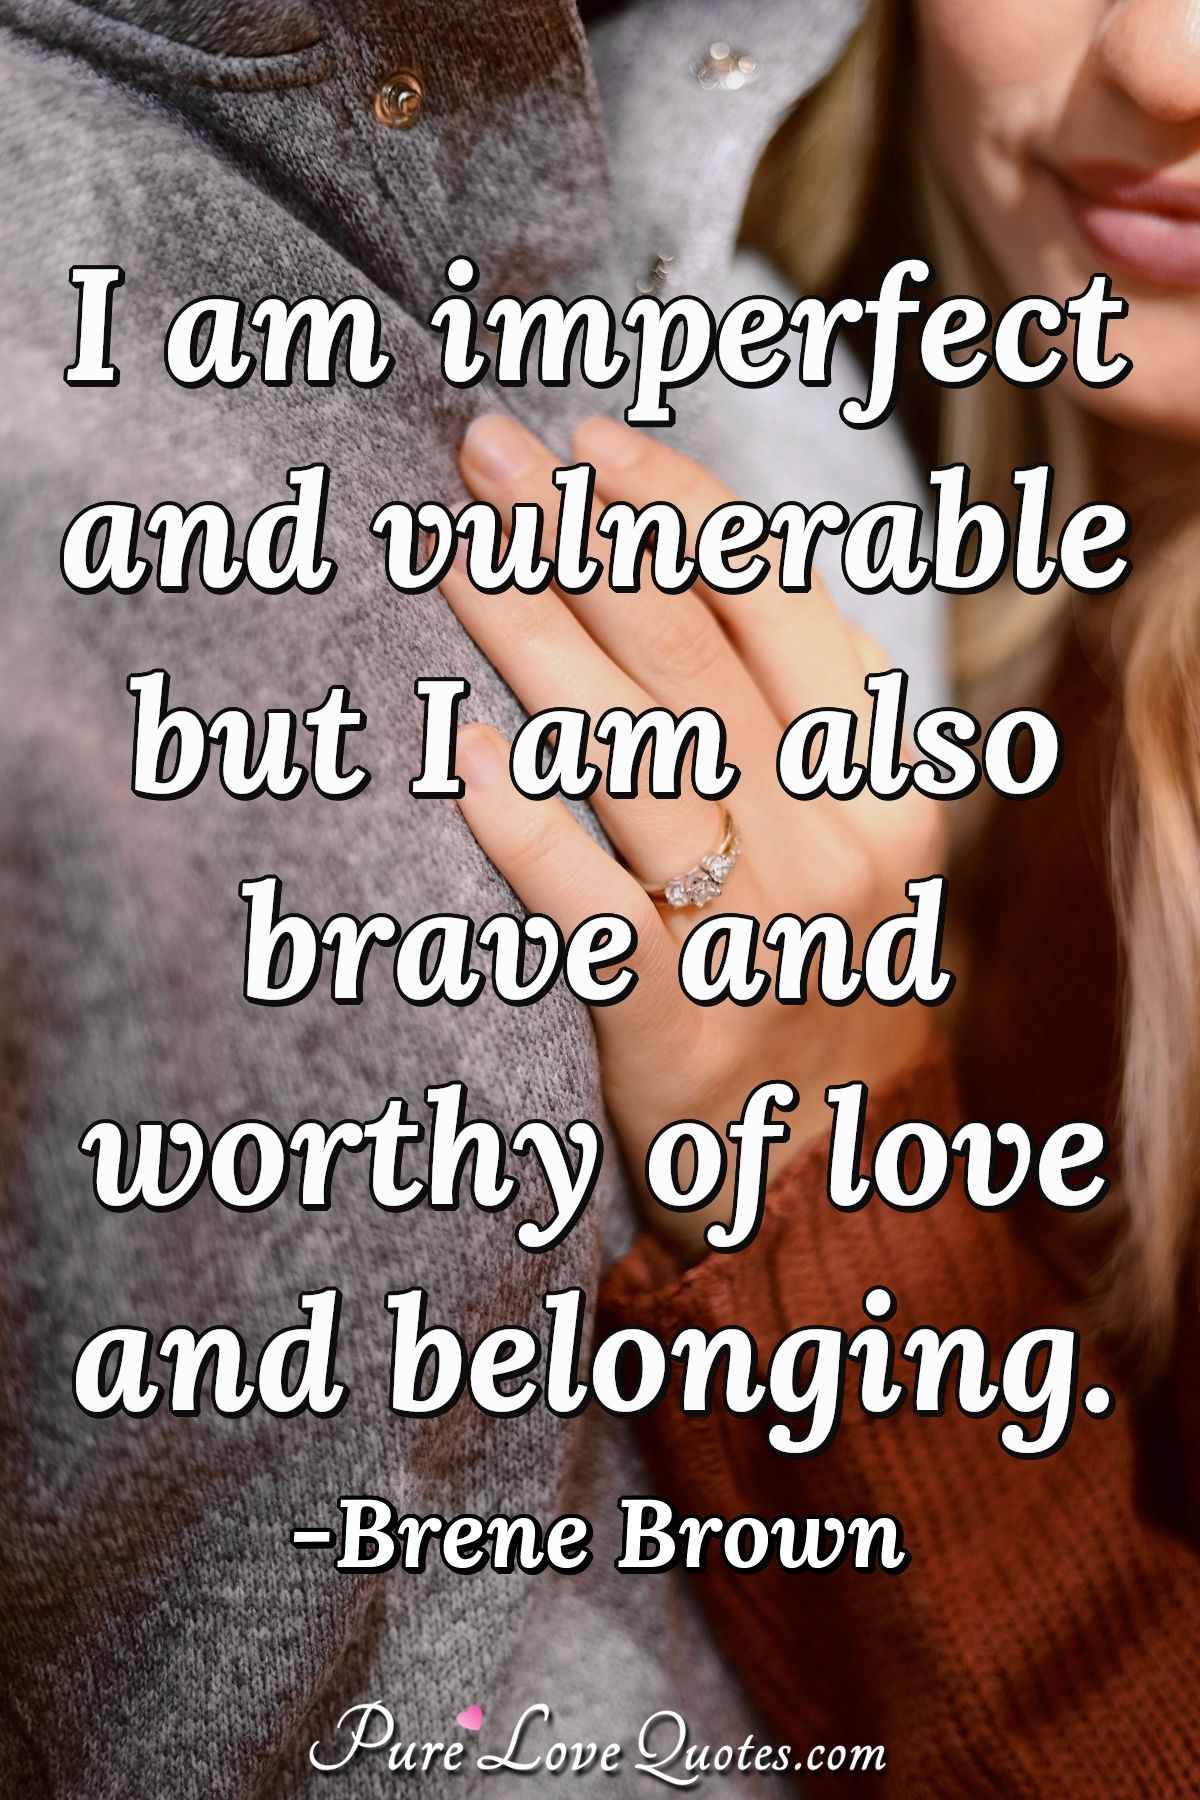 I am imperfect and vulnerable but I am also brave and worthy of love